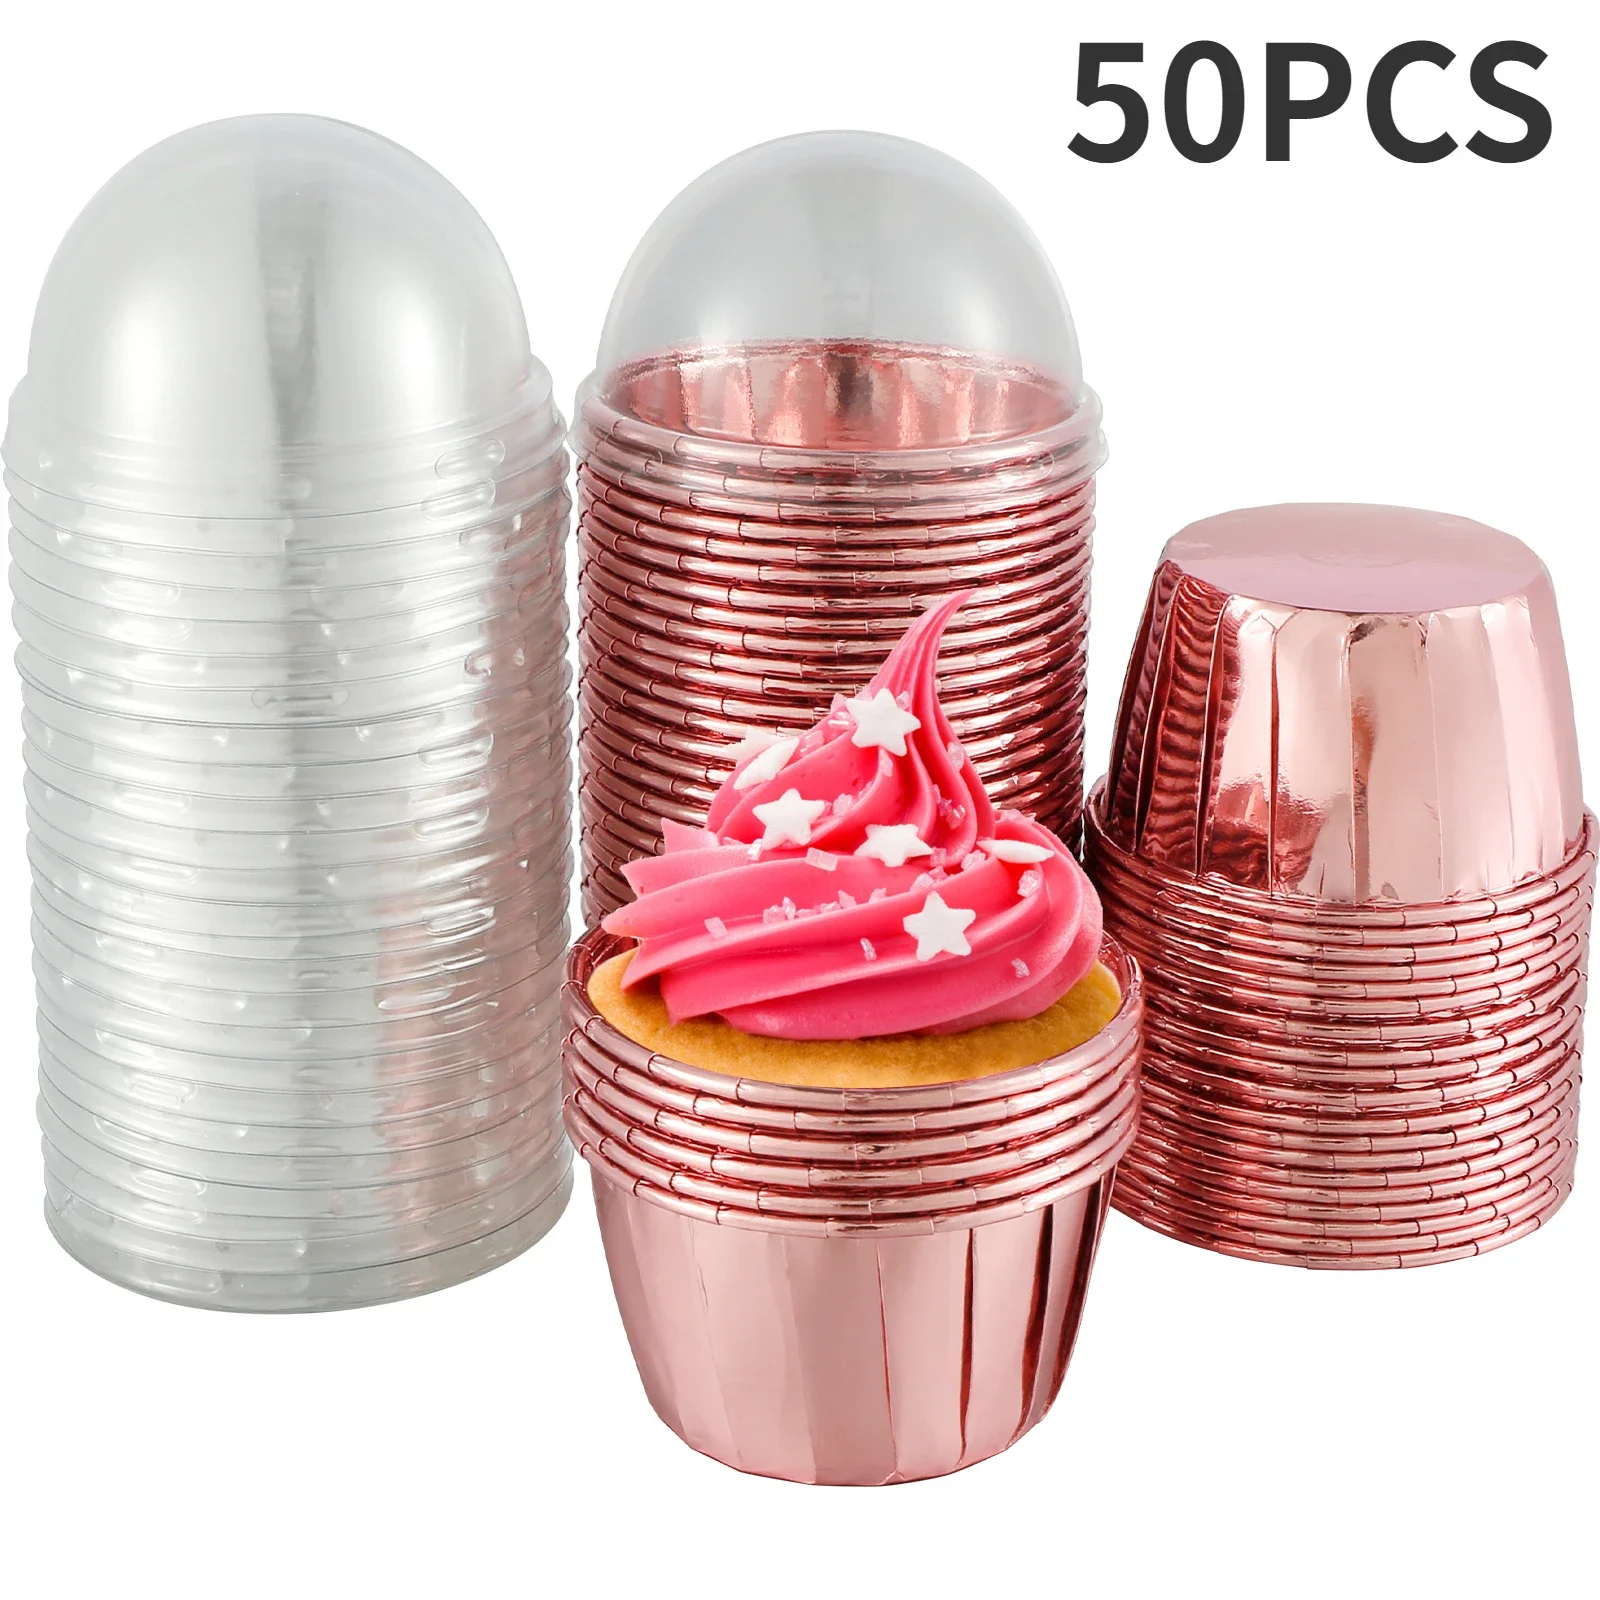 50Pc Foil Cupcake Liners with Lids Heat Resistant 5.5oz Aluminum Cake Cups  Round Foil Baking Cups Kitchen Wedding Party Supplies